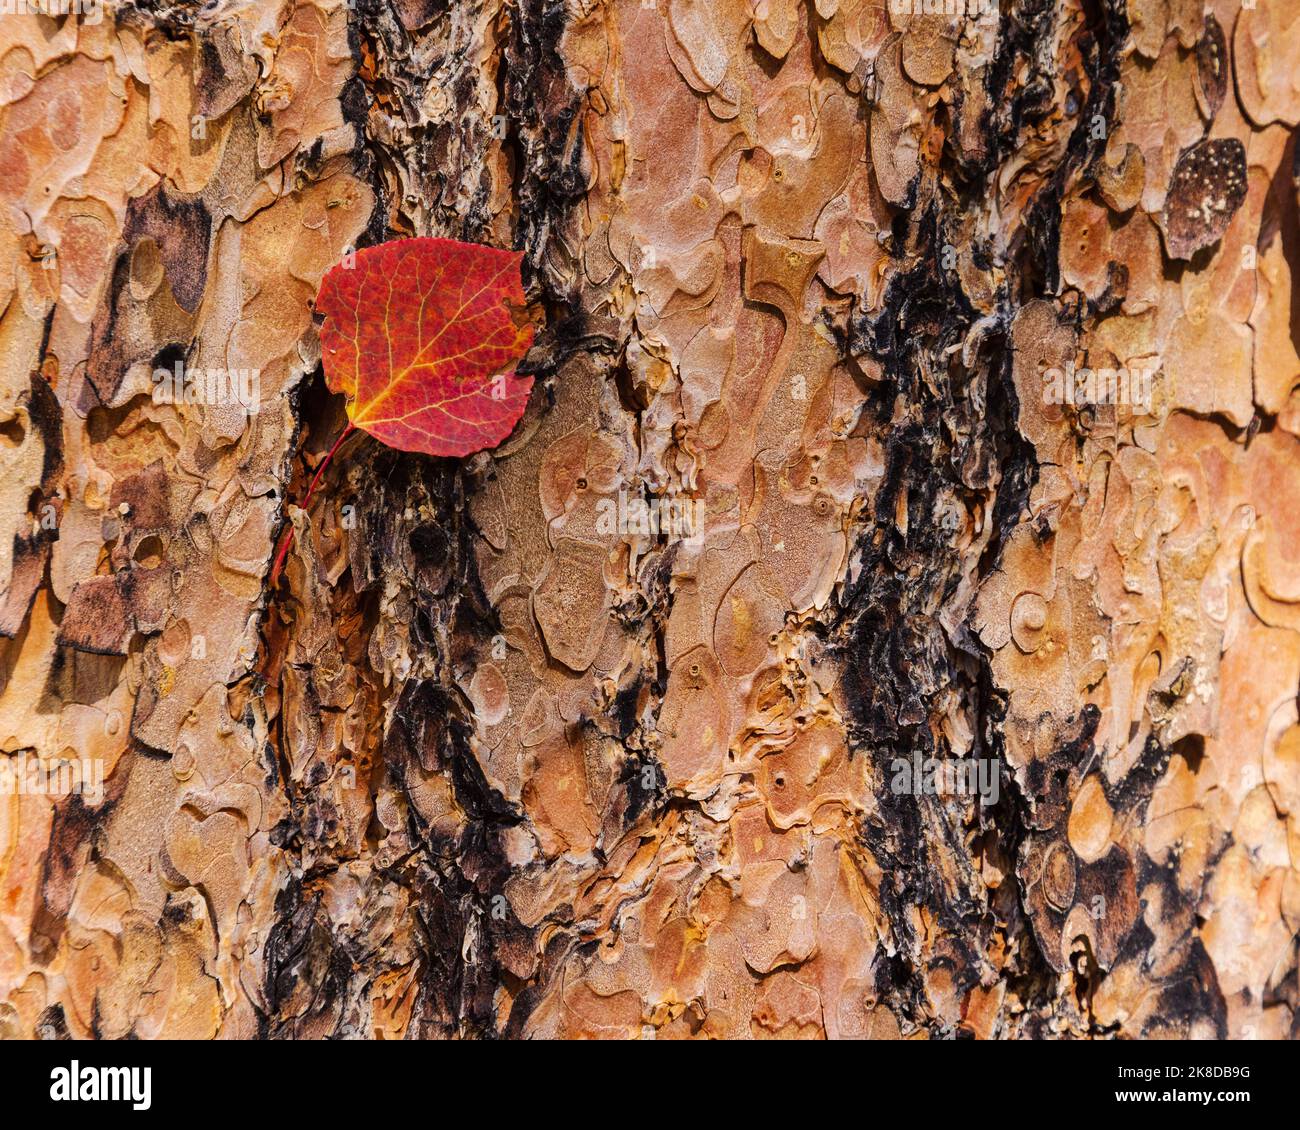 A vibrant Autumn leaf is snagged by the bark of a Ponderosa pine tree. Stock Photo